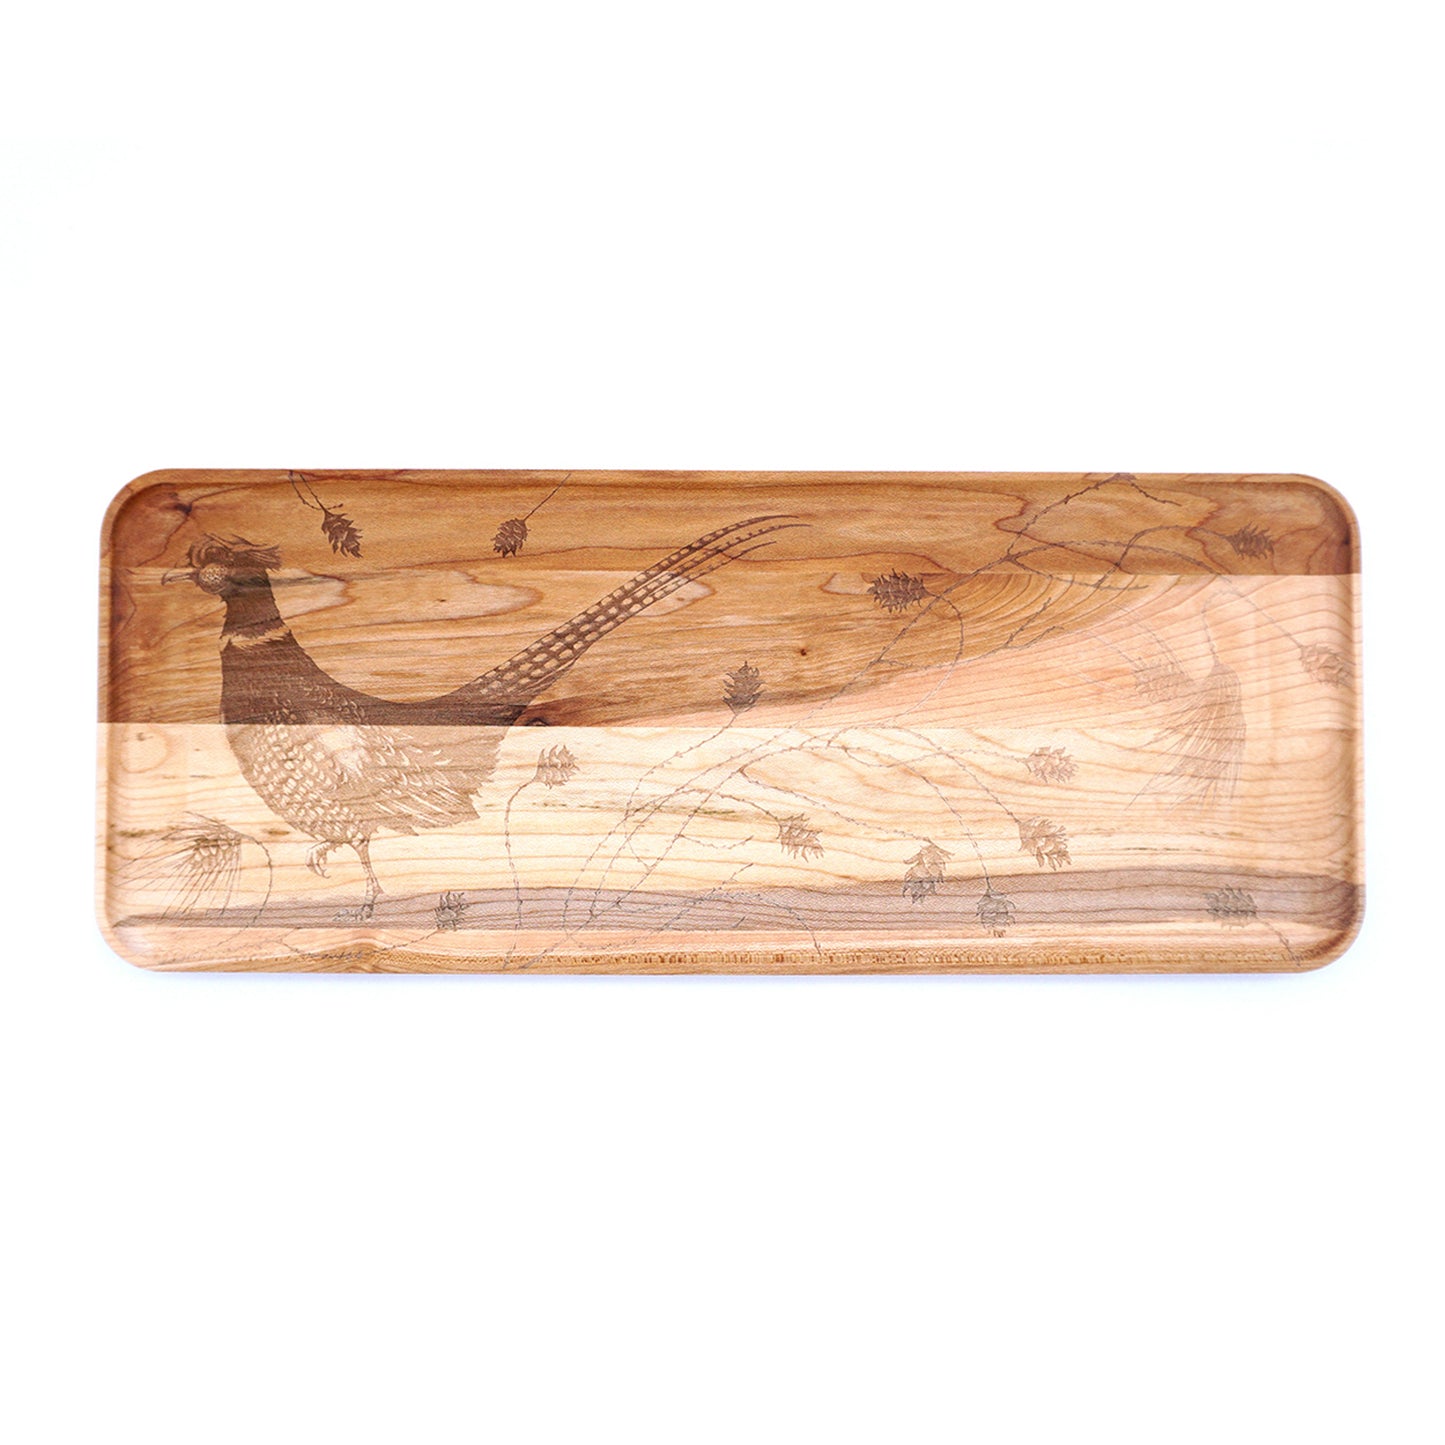 Laura Zindel Maple Appetizer Tray - More designs available